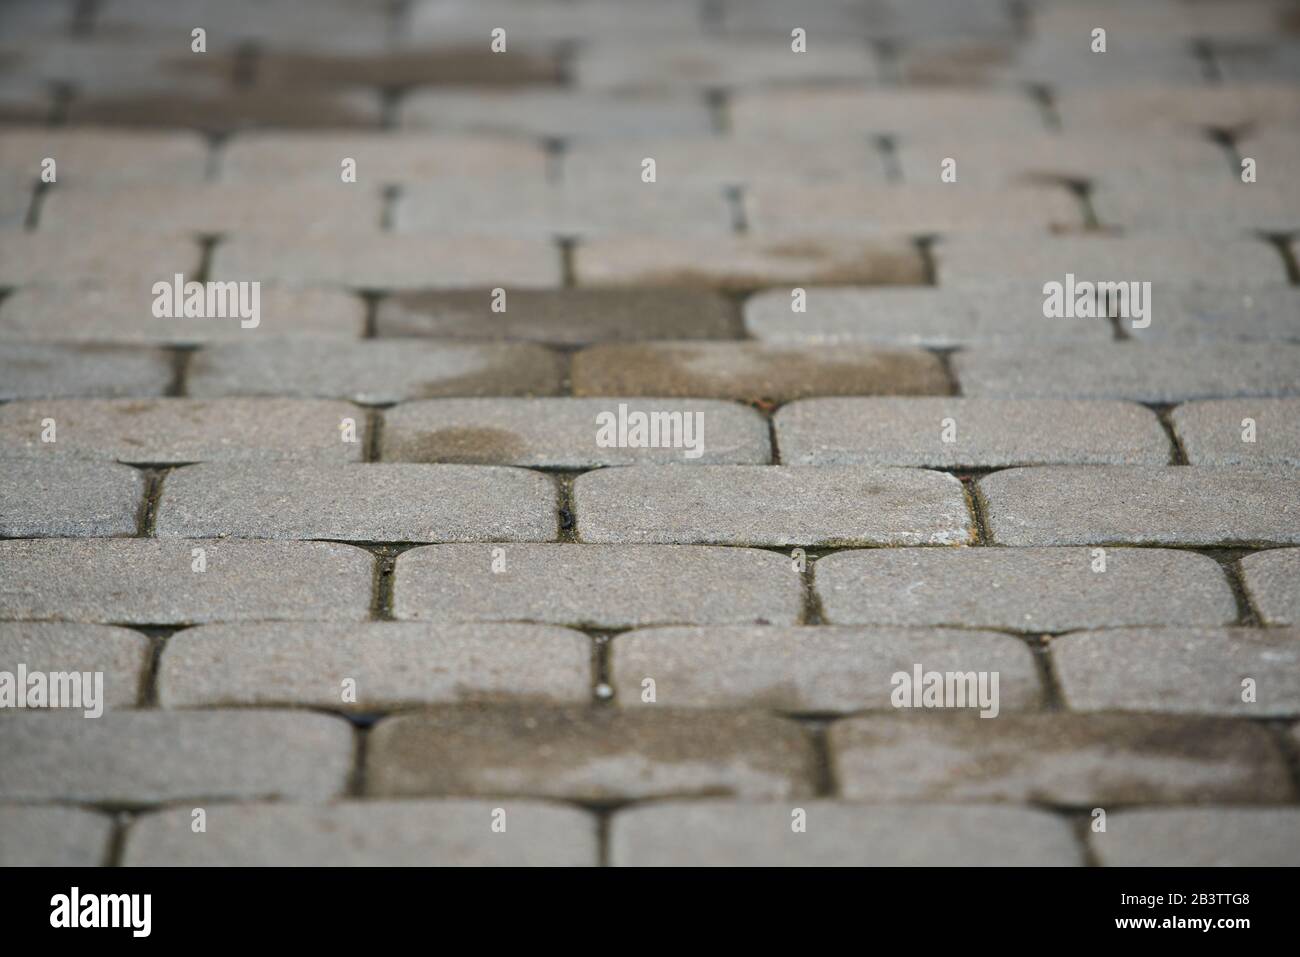 abstract background of cobble stone road making from cement blocks Stock Photo